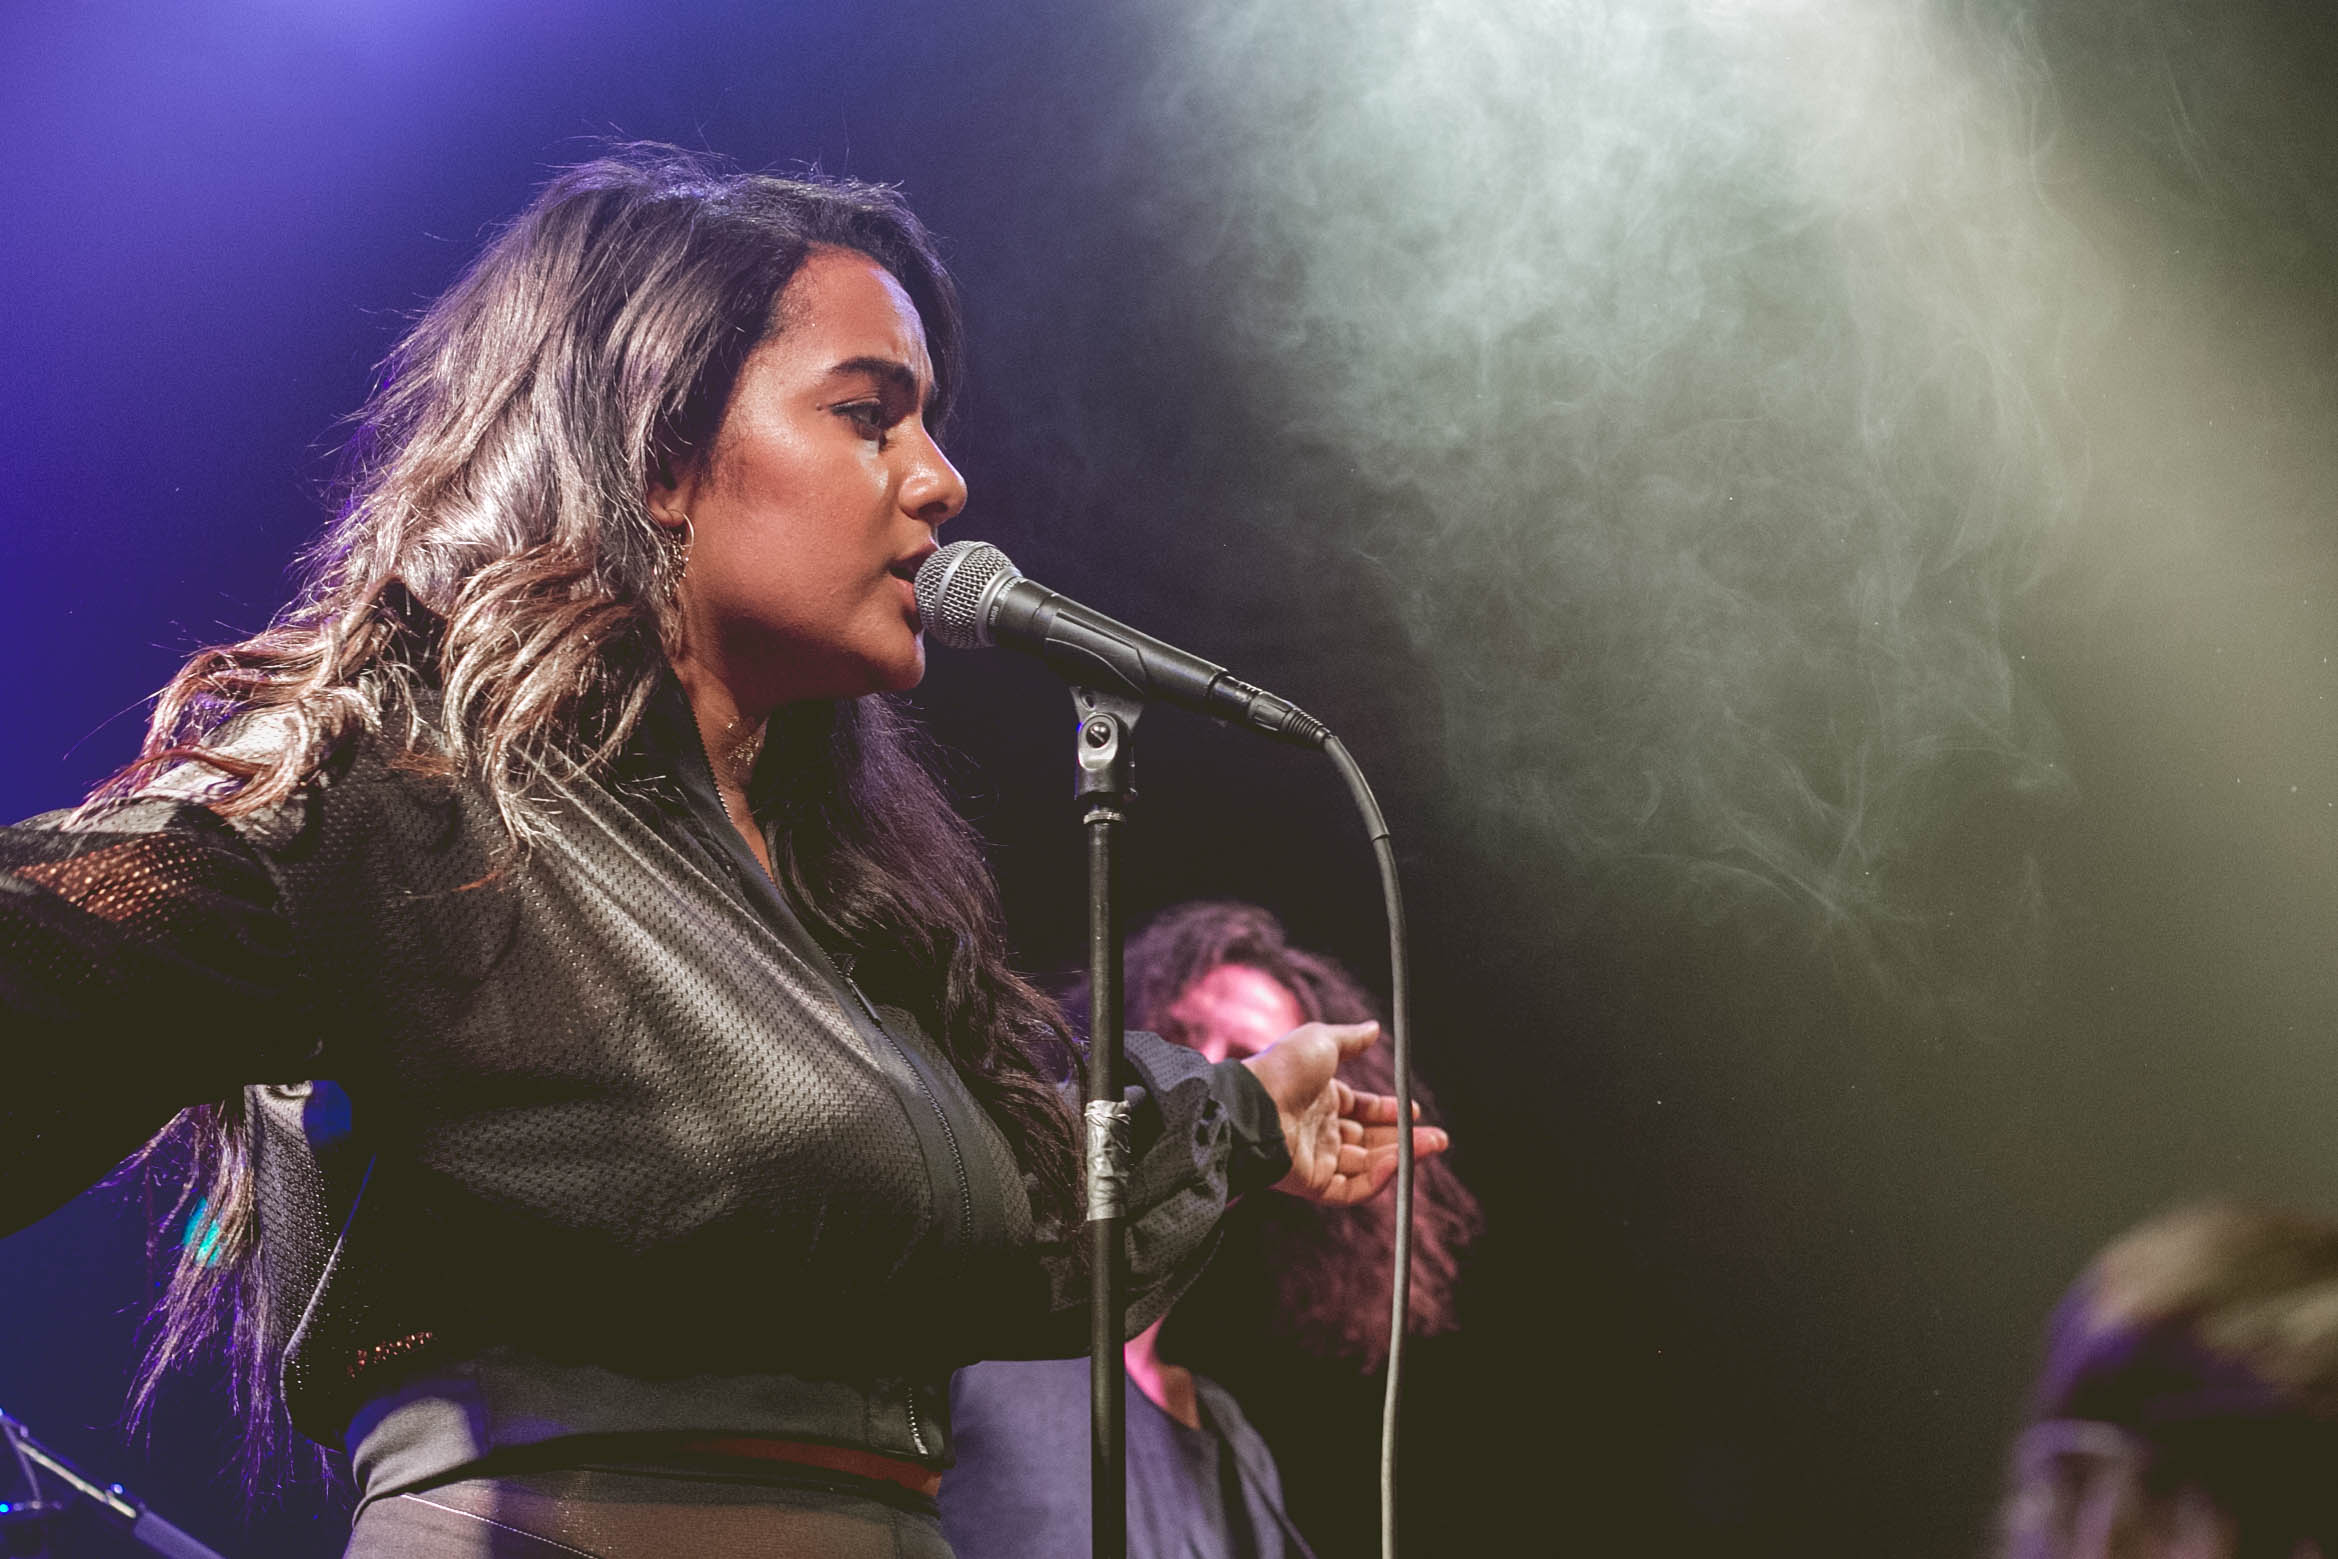 Bibi Bourelly @ Bootleg Theater 11/12/16.Photo by Hector Vergara (@theHextron) for www.BlurredCulture.com. This photo was obtained under the express authorization and license by Red Bull Media House North America, Inc.